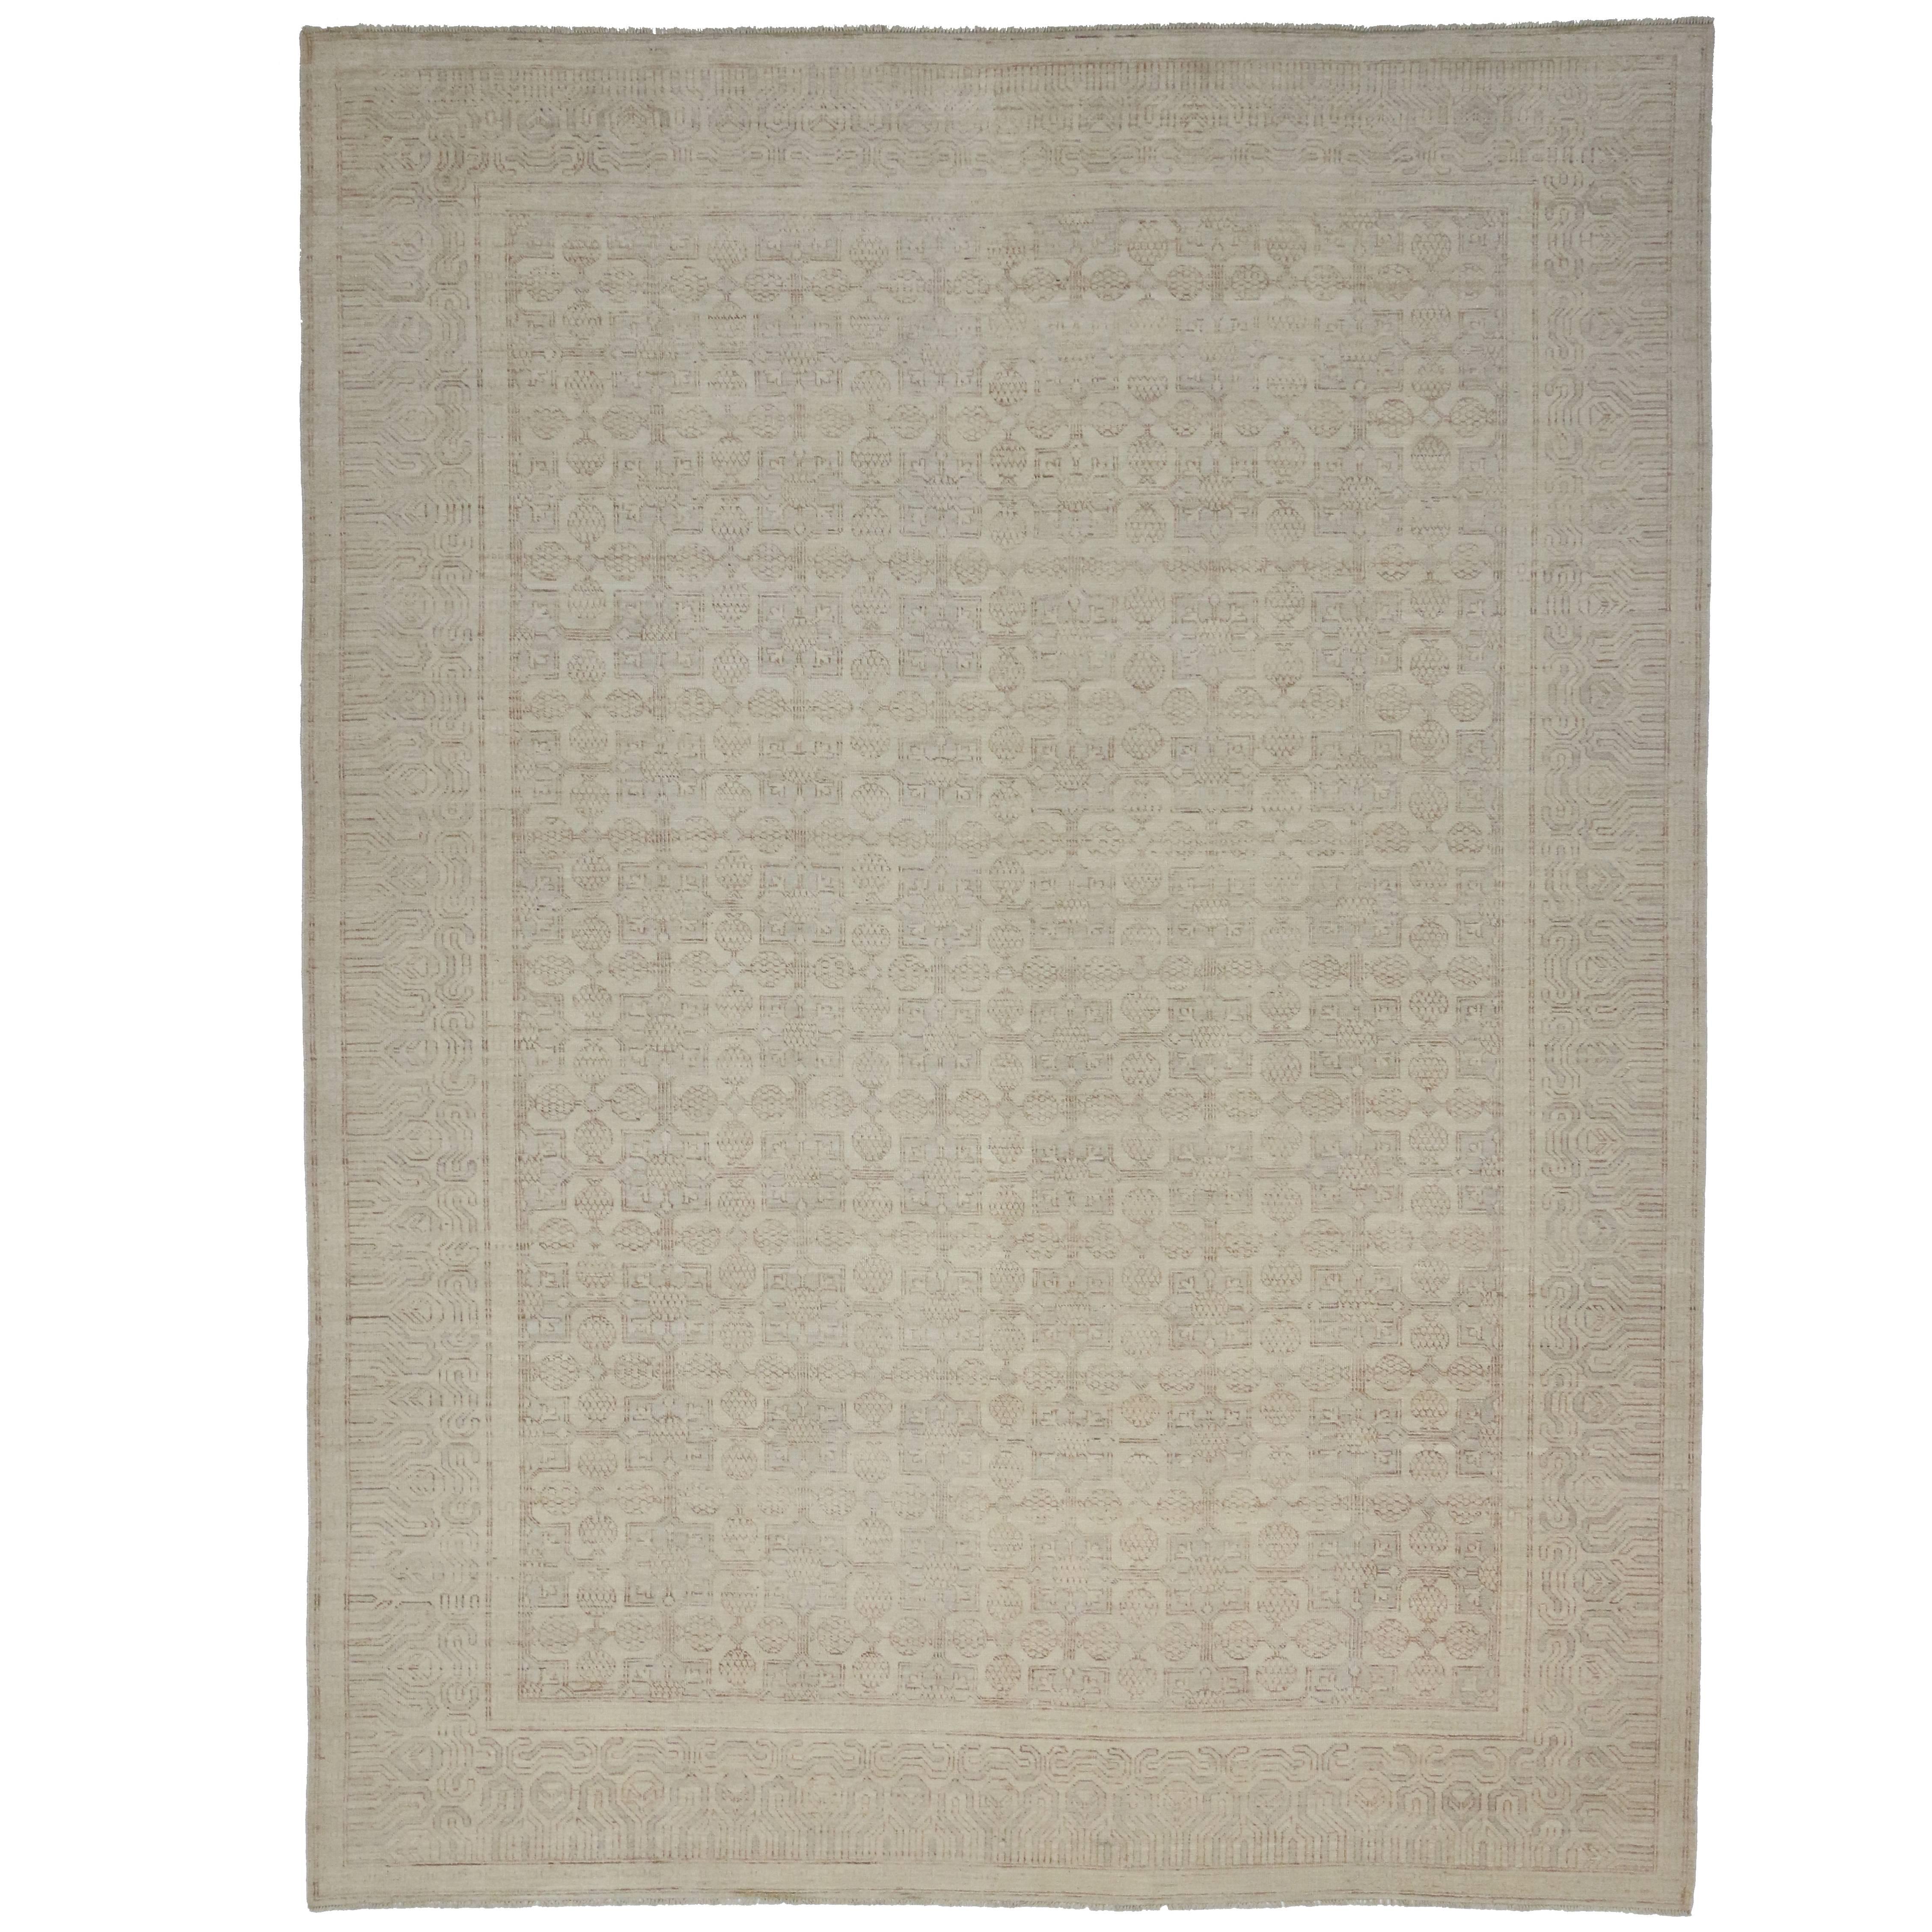 New Modern Khotan Style Rug with Transitional Design in Muted Colors